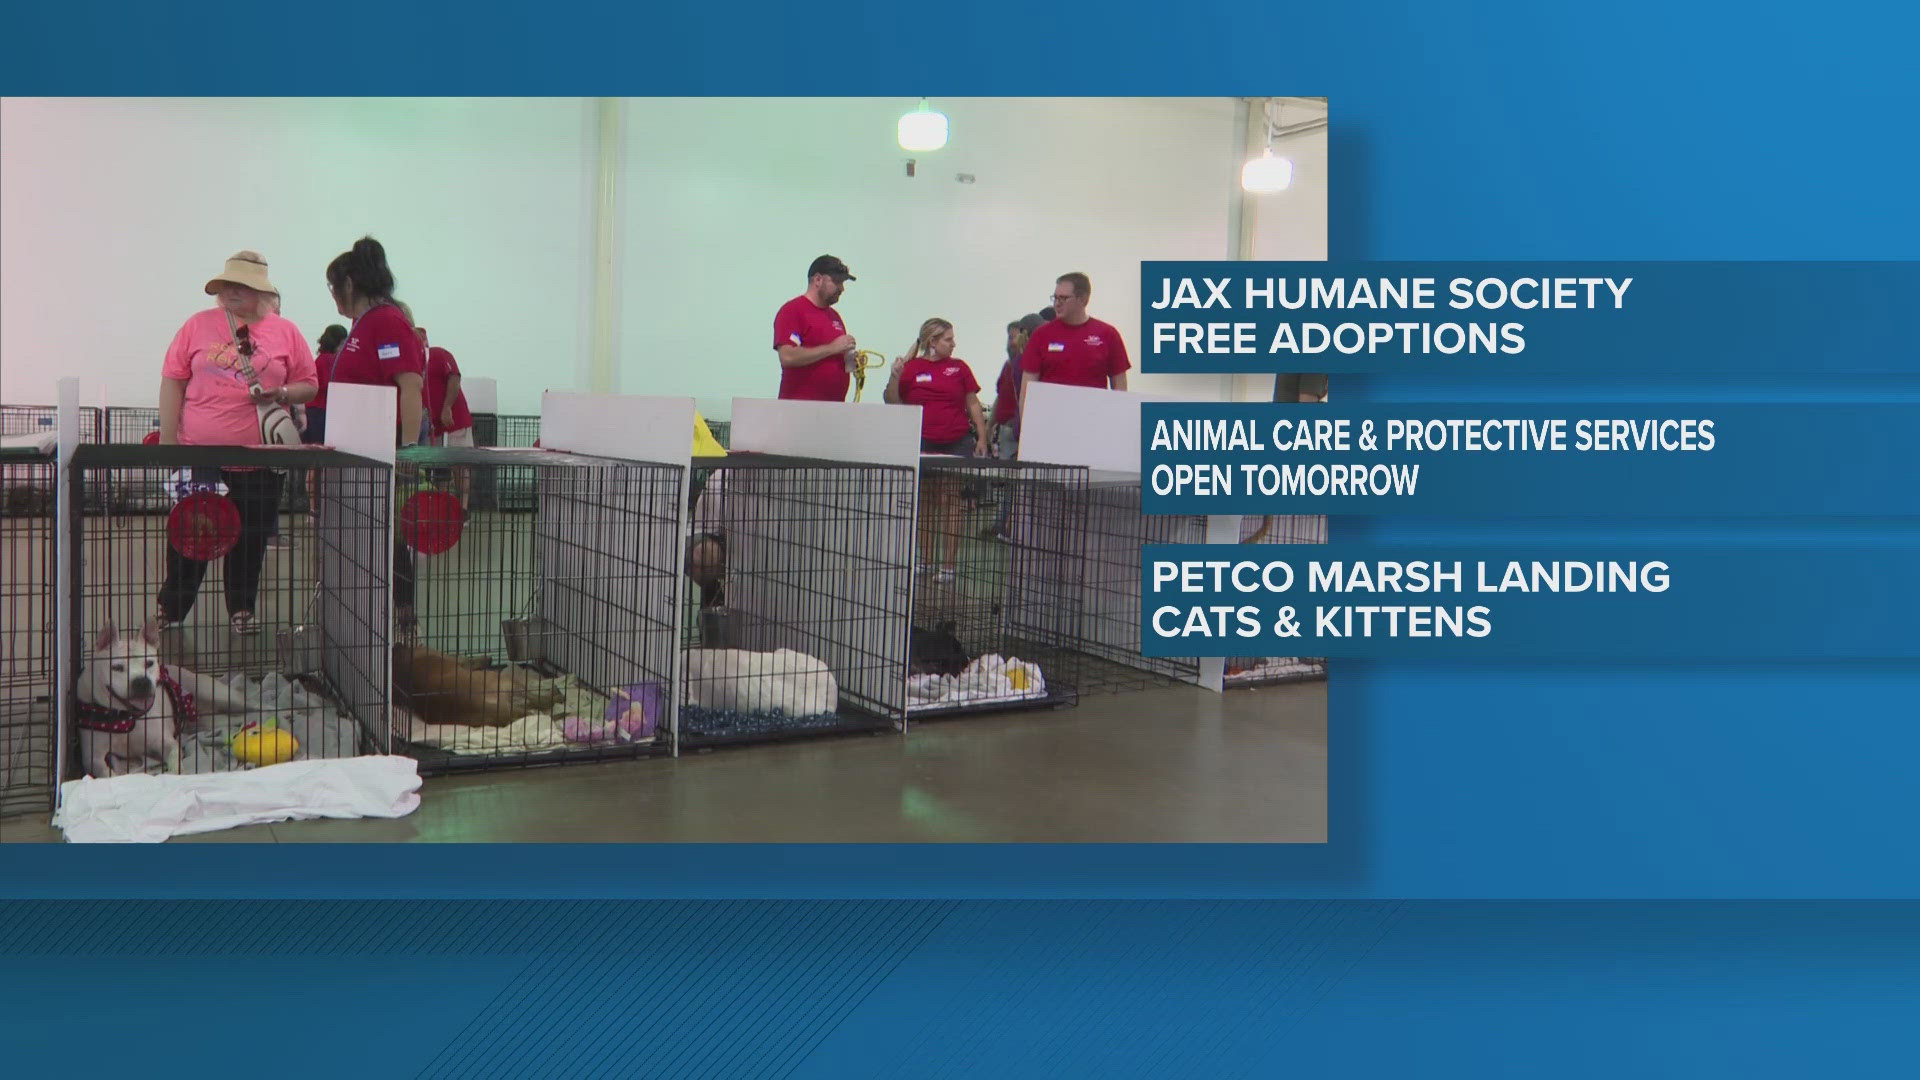 The Jacksonville Humane Society said every cat was adopted at the two-day event.